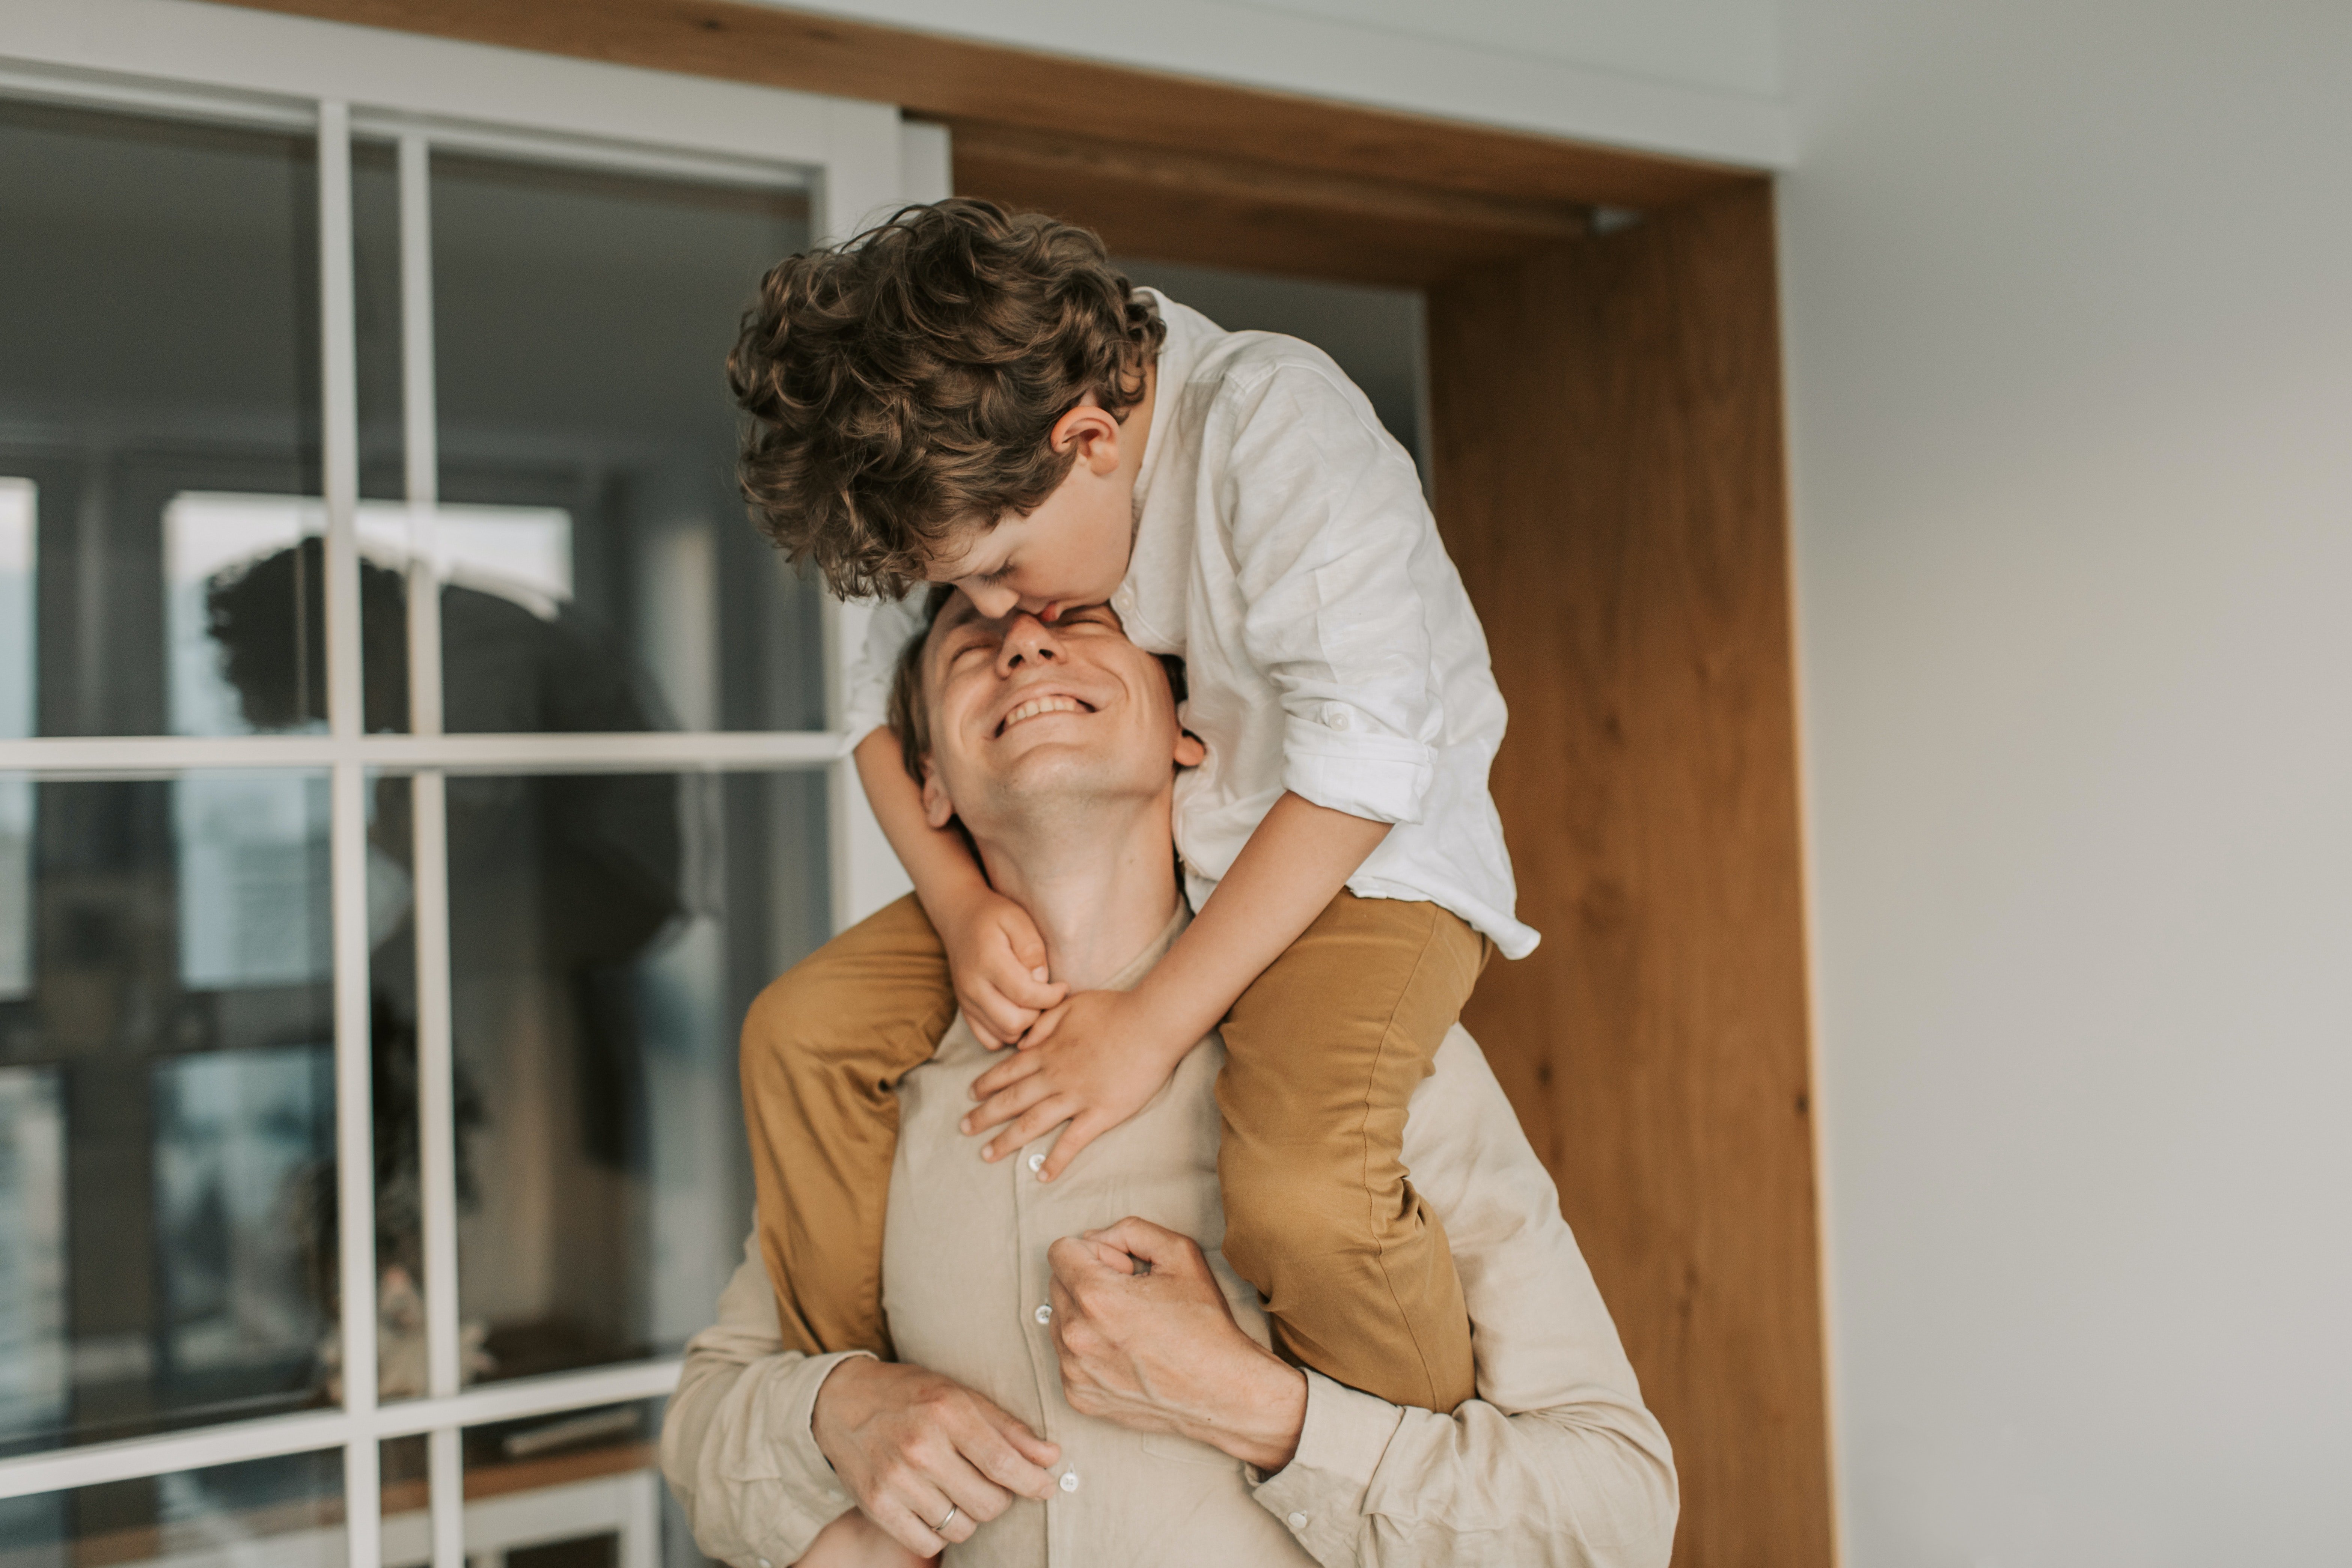 Pictured - A man carrying his son on his shoulders wearing coordinated outfits | Source: Pexels 